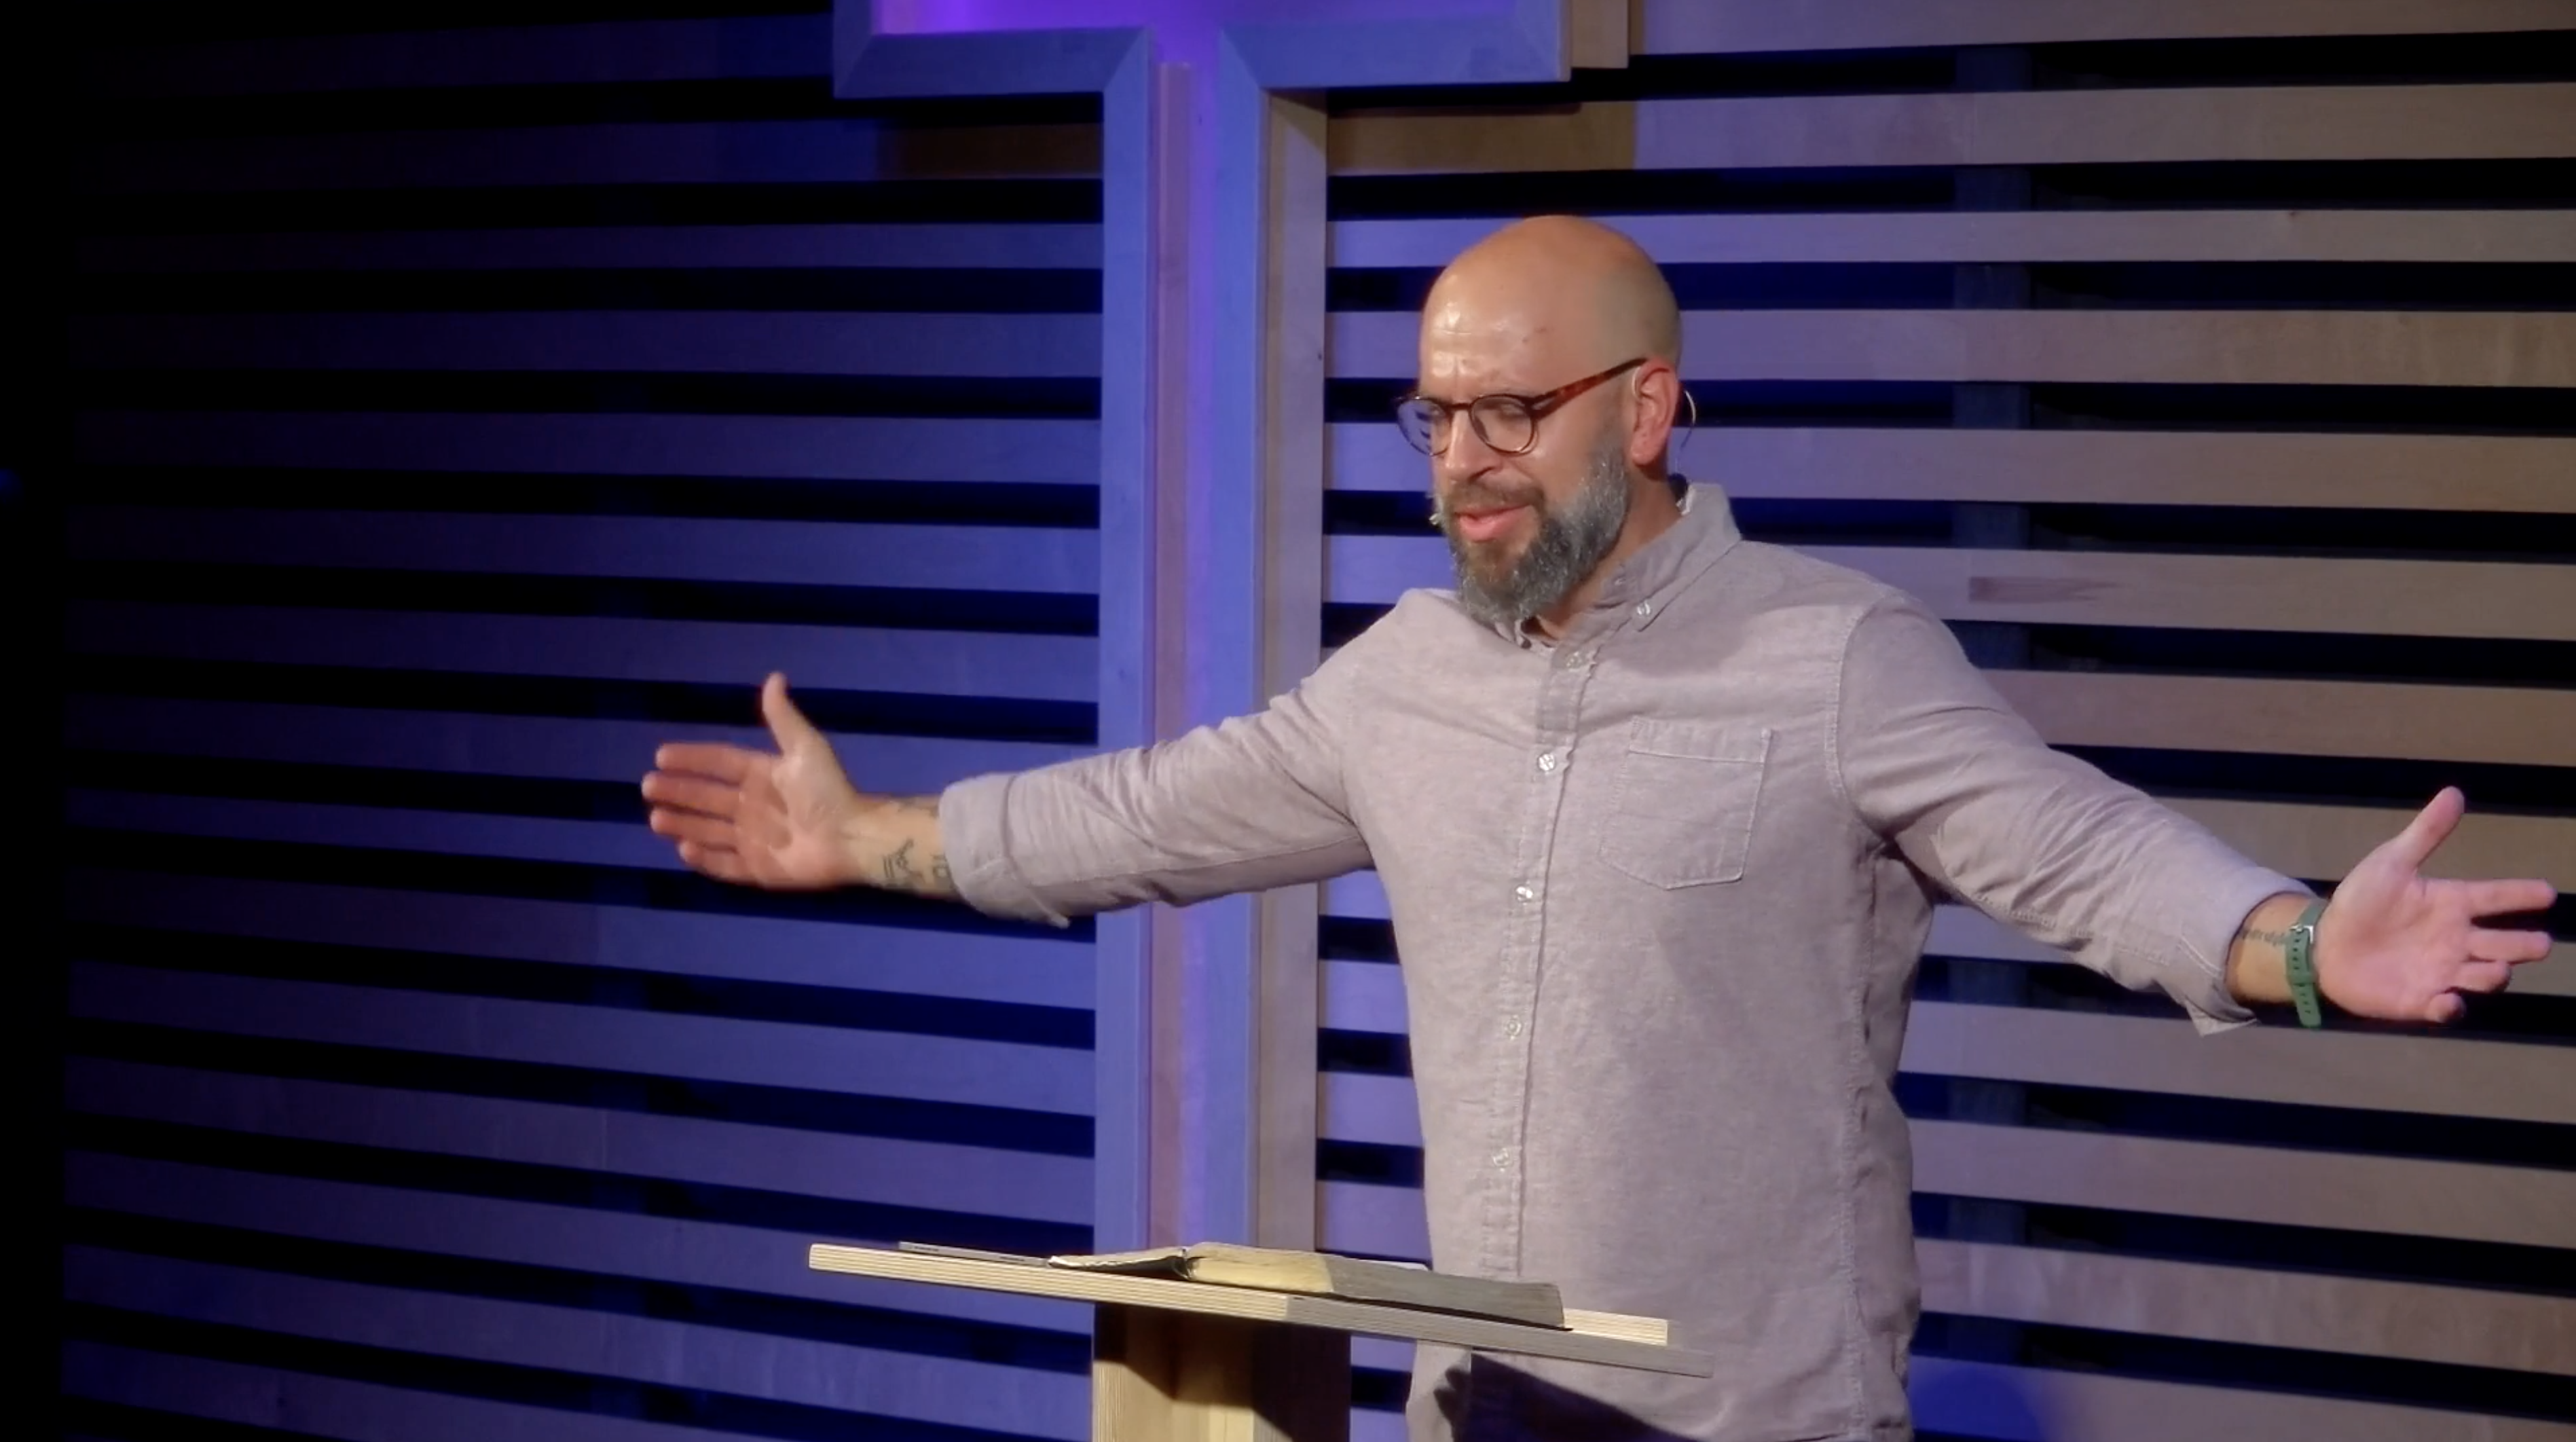 2021 US National Conference: Tony Merida on Missional Integrity